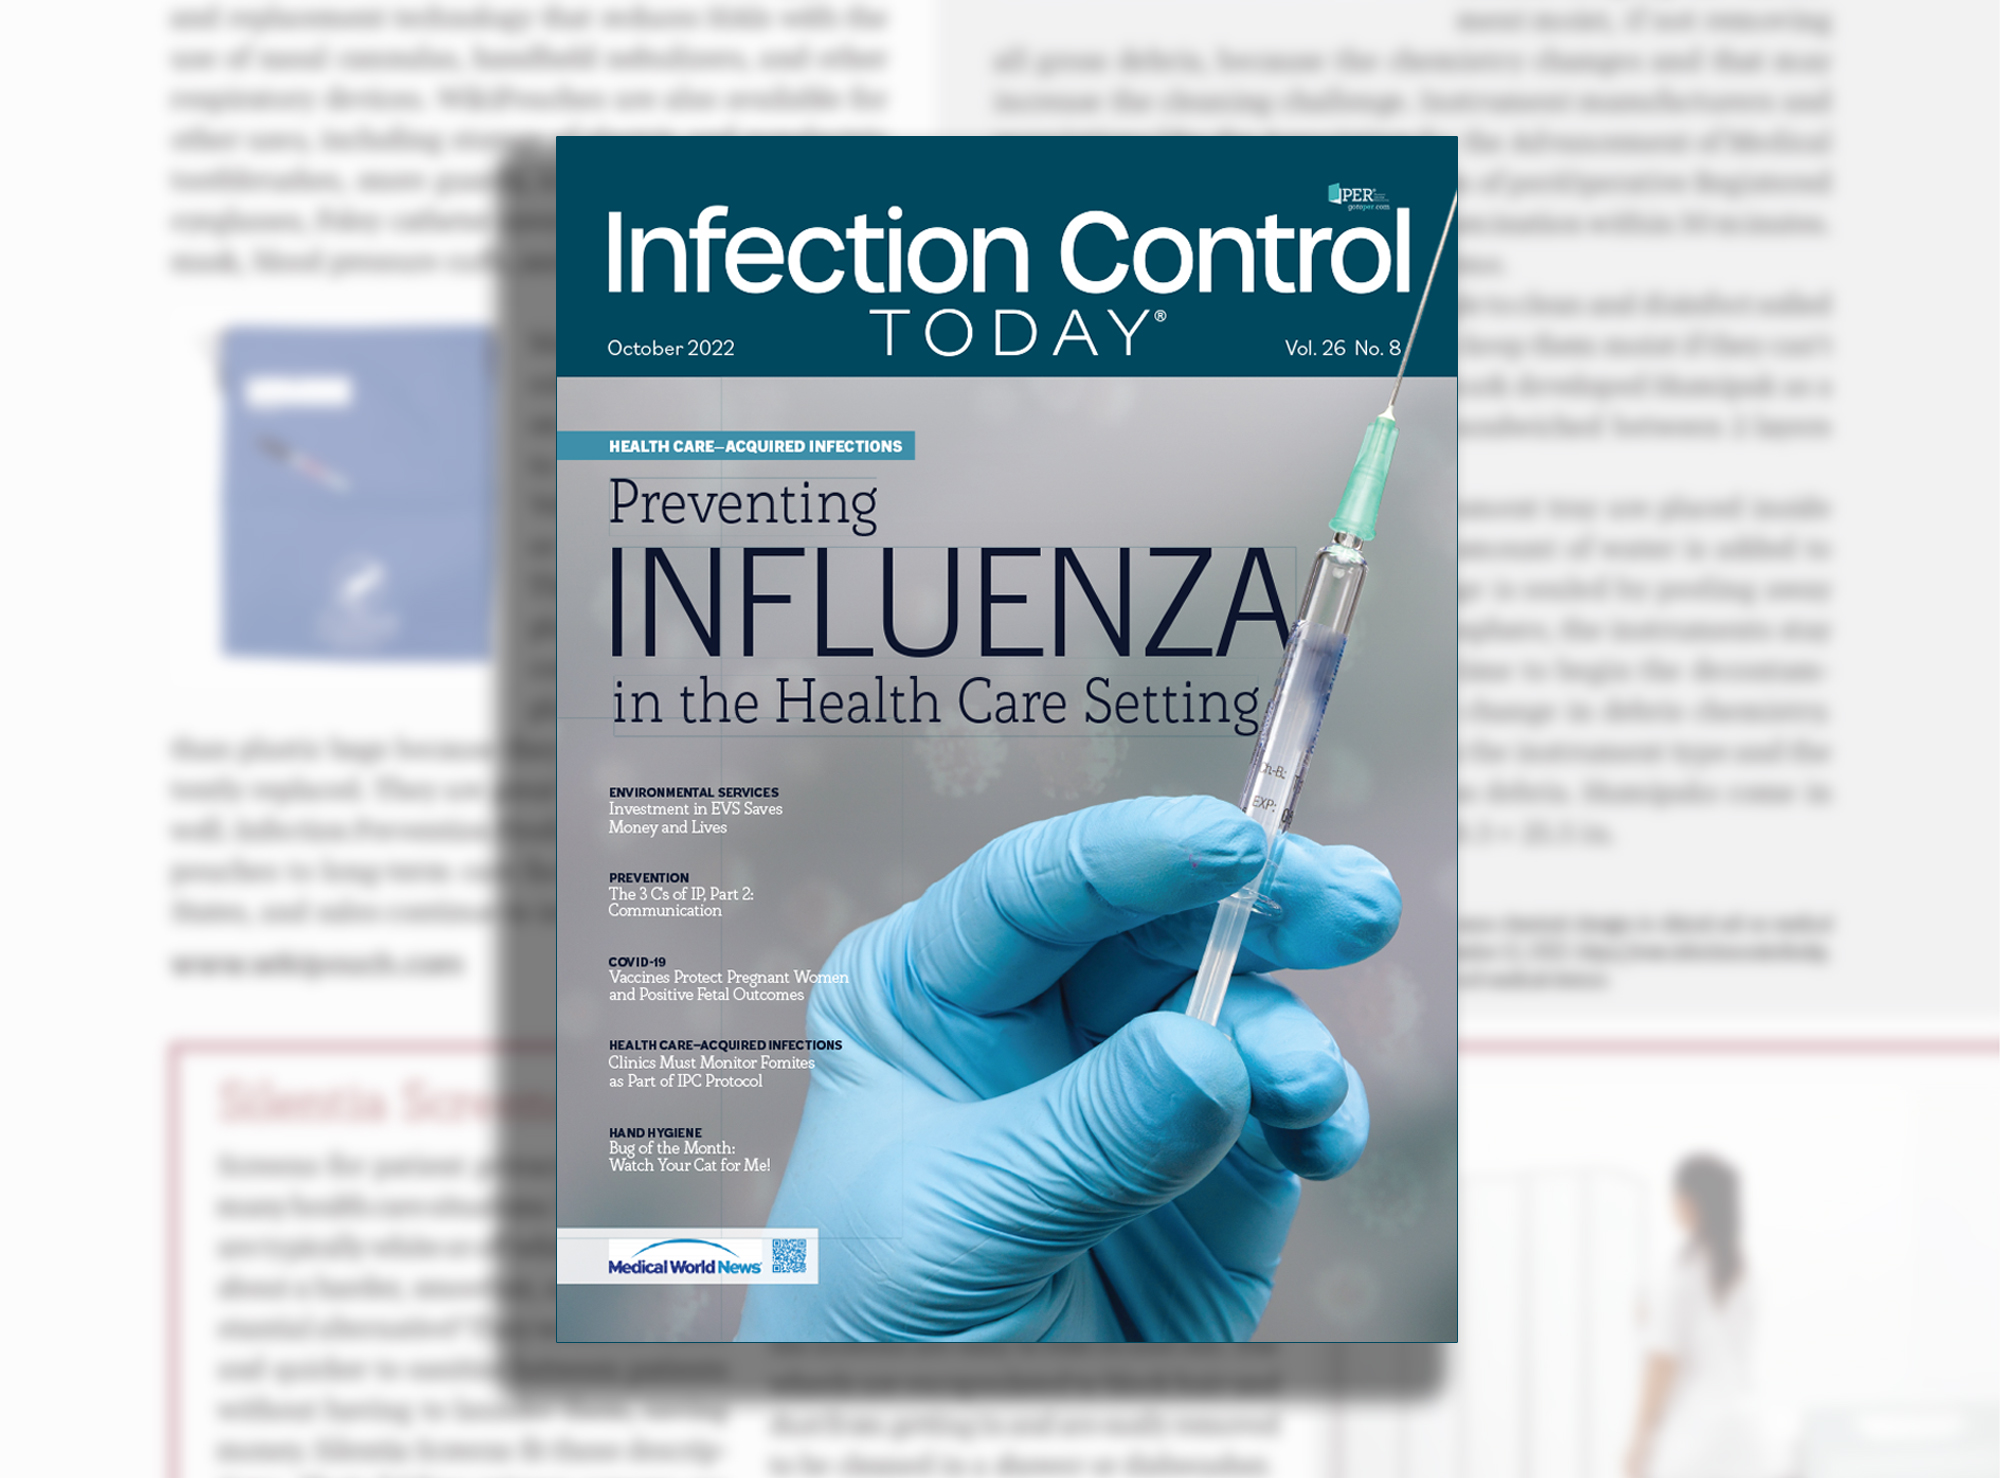 Silentia featured in Infection Control Today October issue